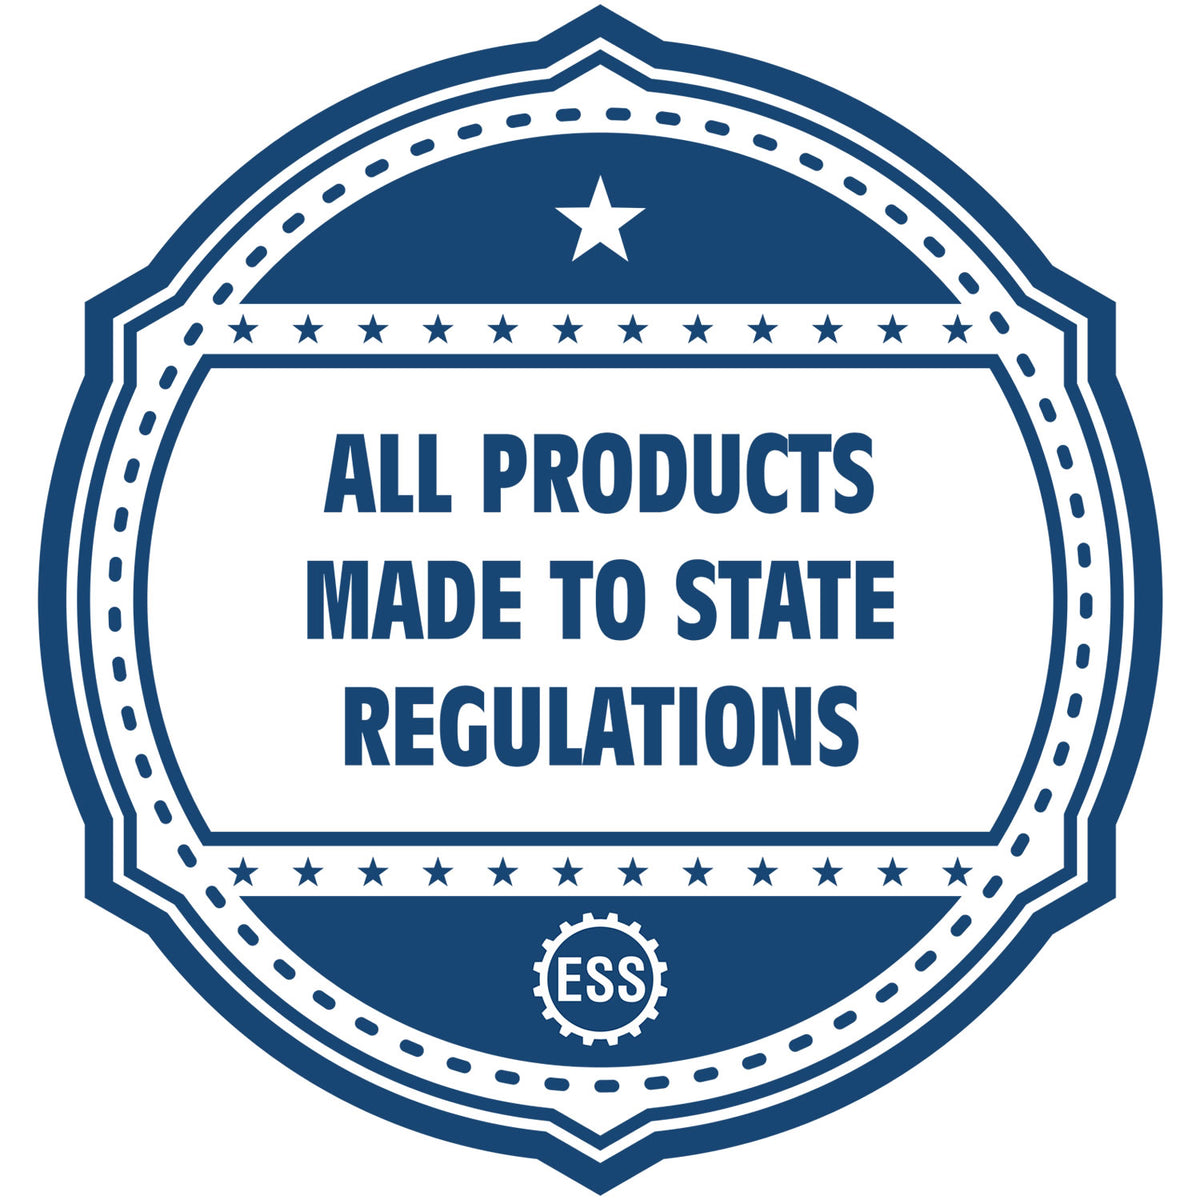 A blue icon or badge for the Gift Missouri Landscape Architect Seal showing that this product is made in compliance with state regulations.